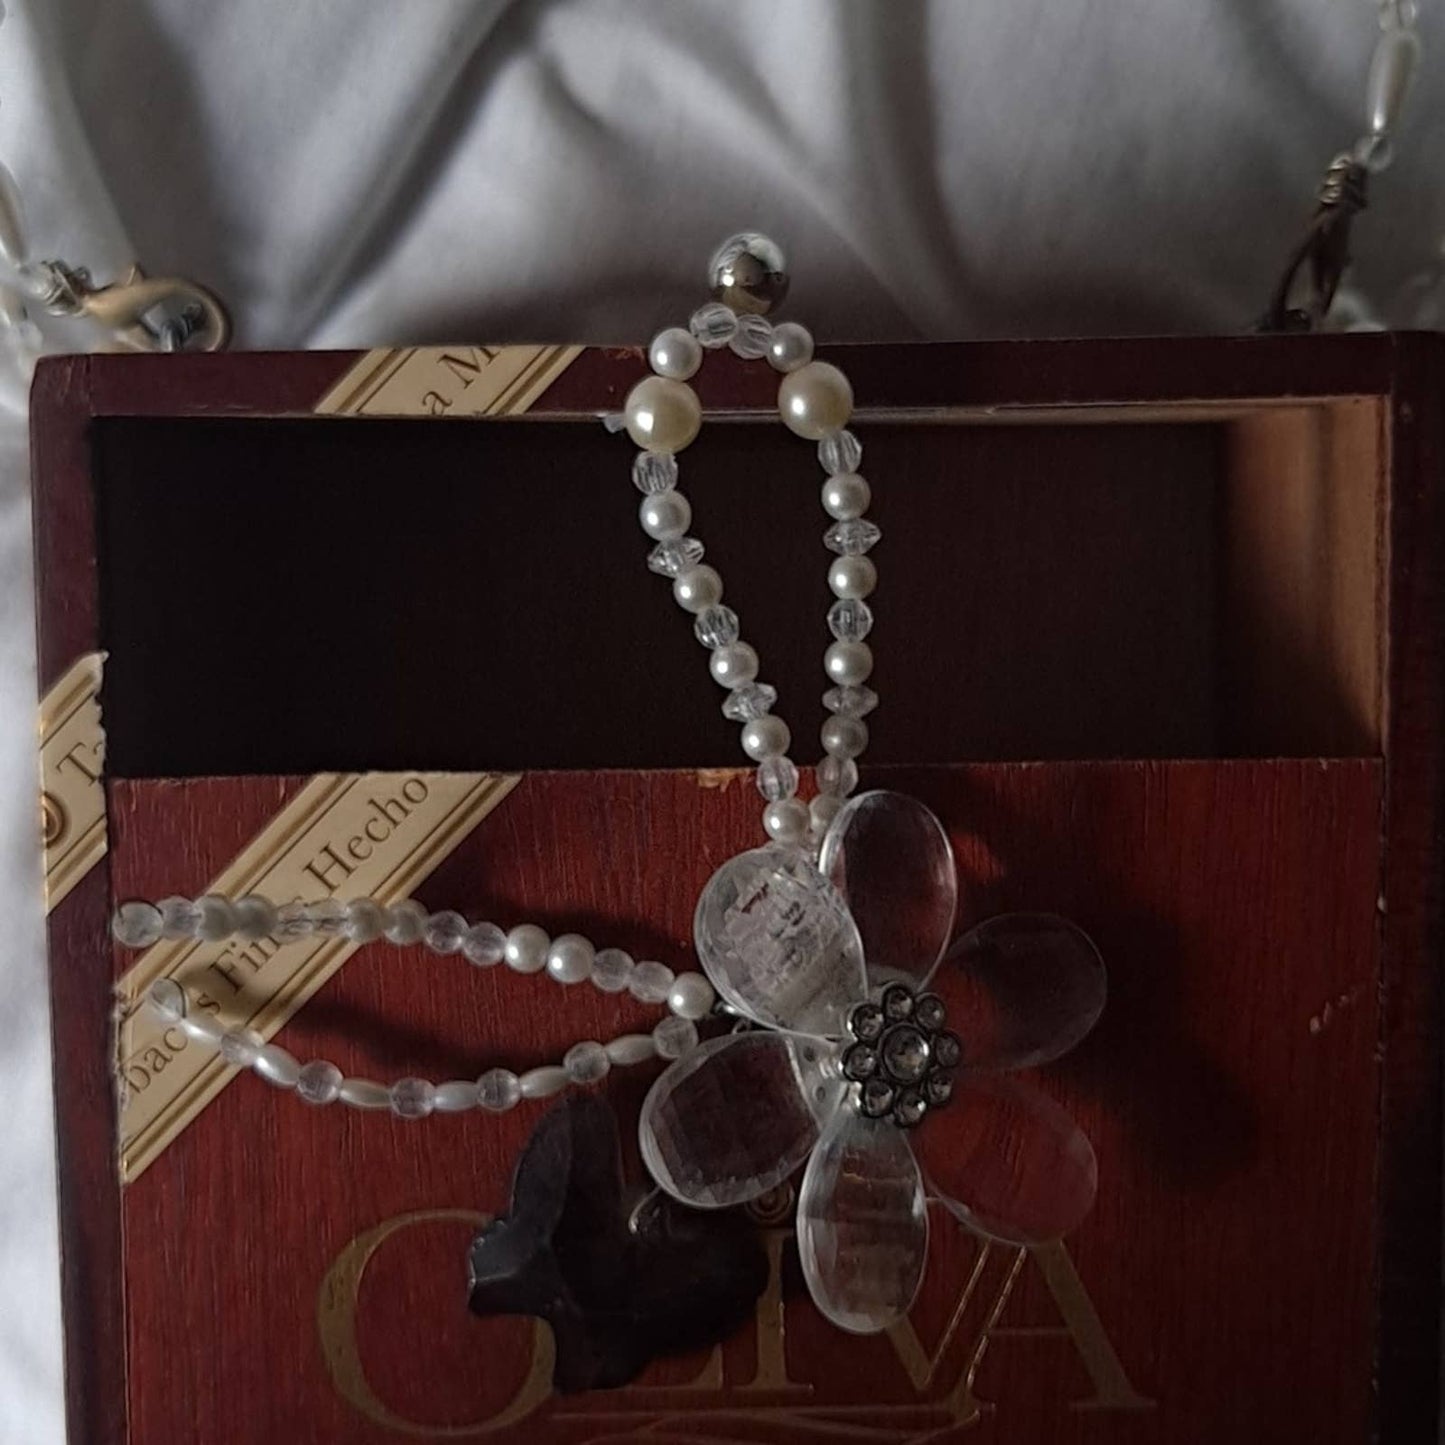 Cigar box purse with faux crystal & pearl accents and dark wood Oliva cigar box